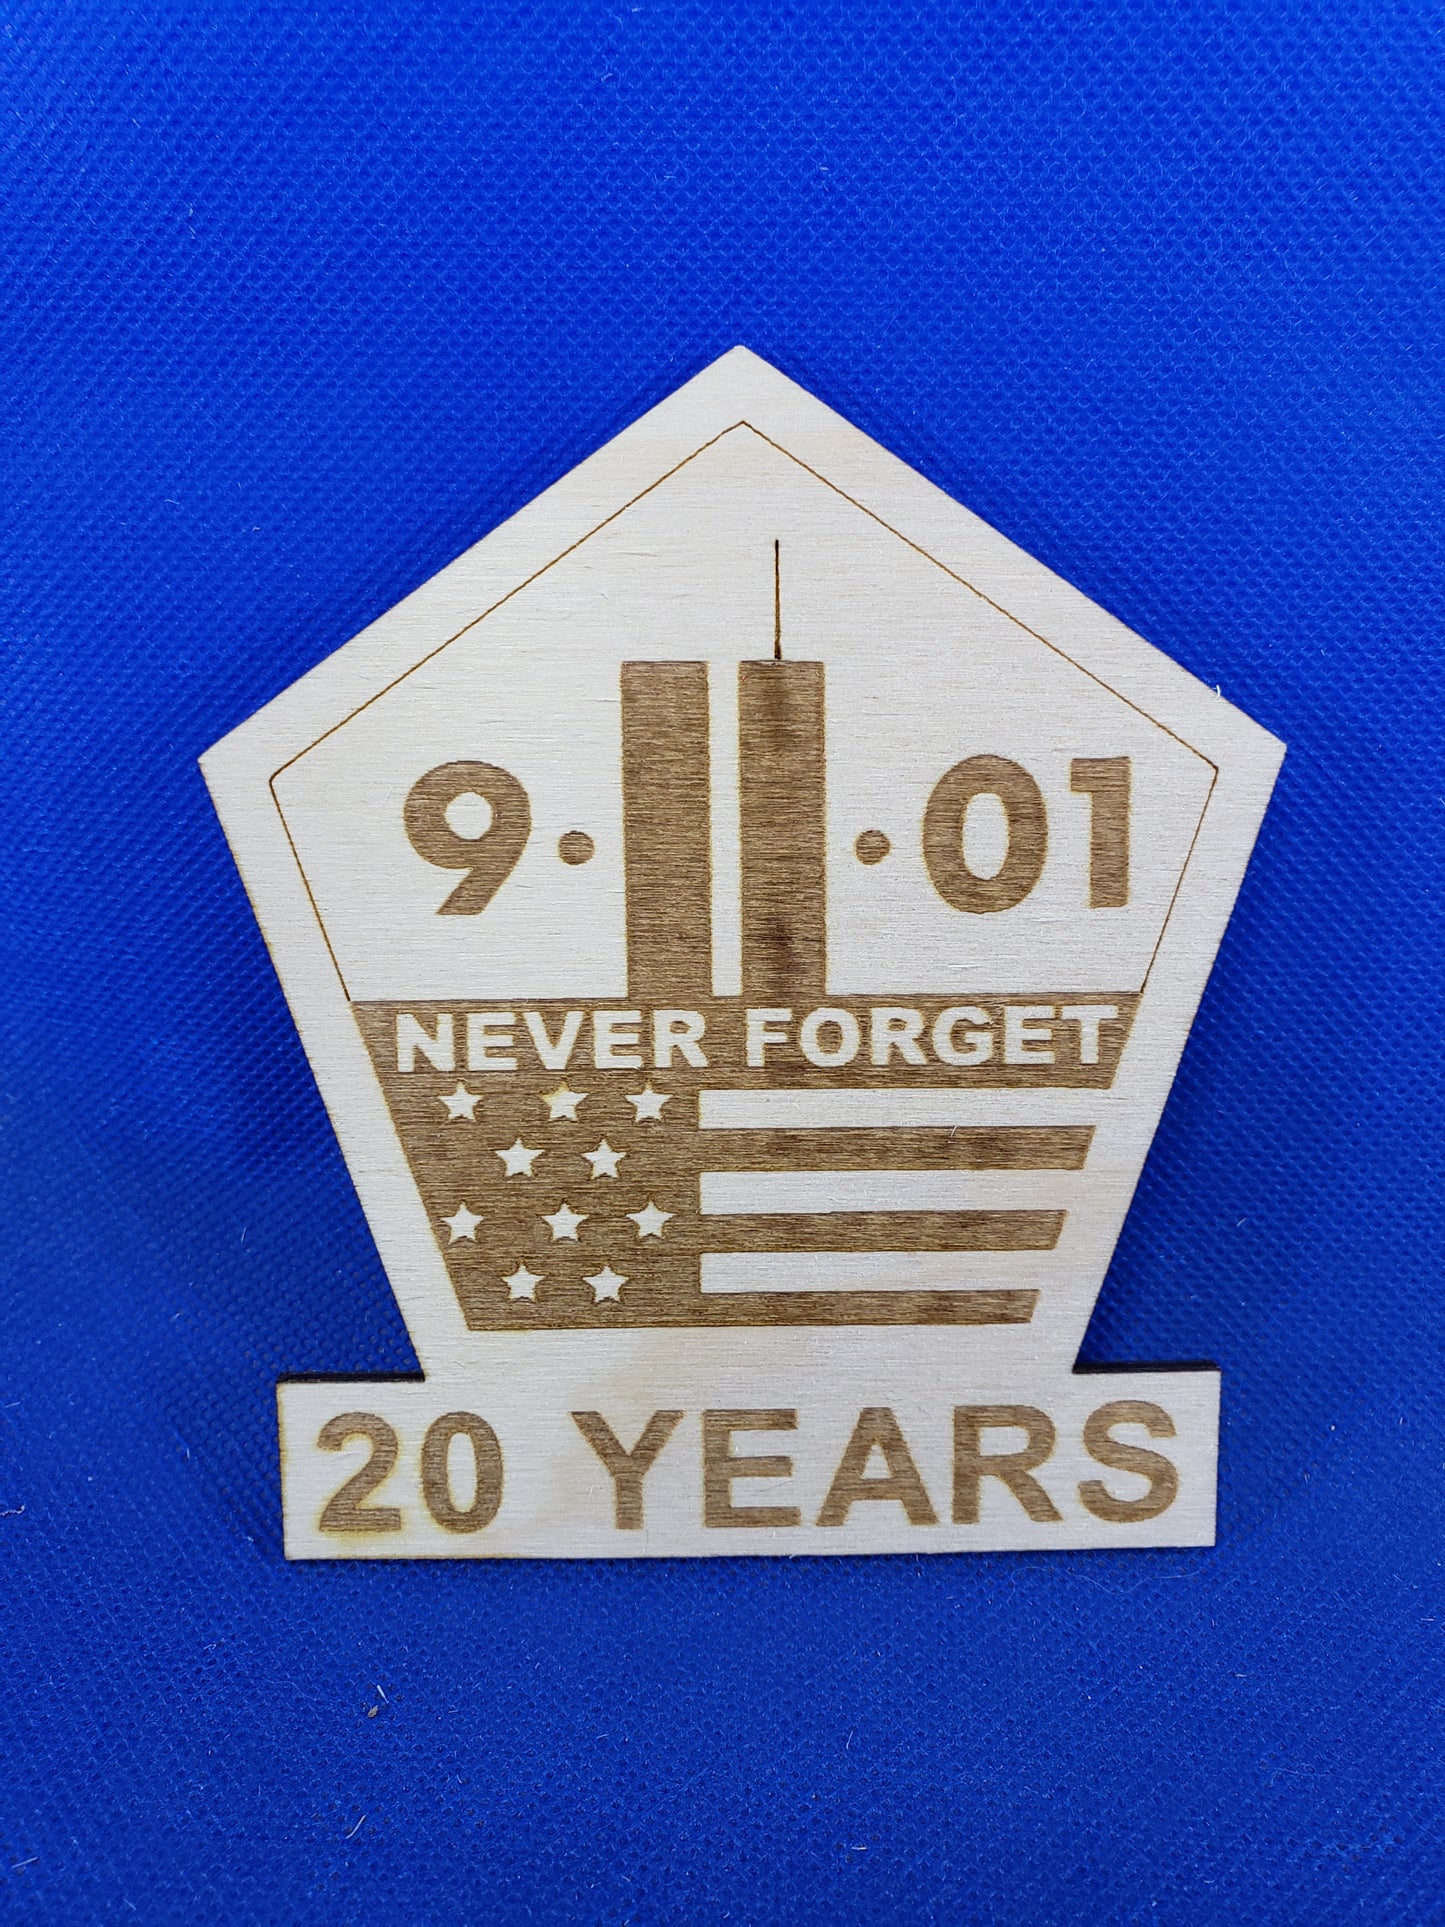 9-11-01 Never Forget - Laser cut natural wooden blank